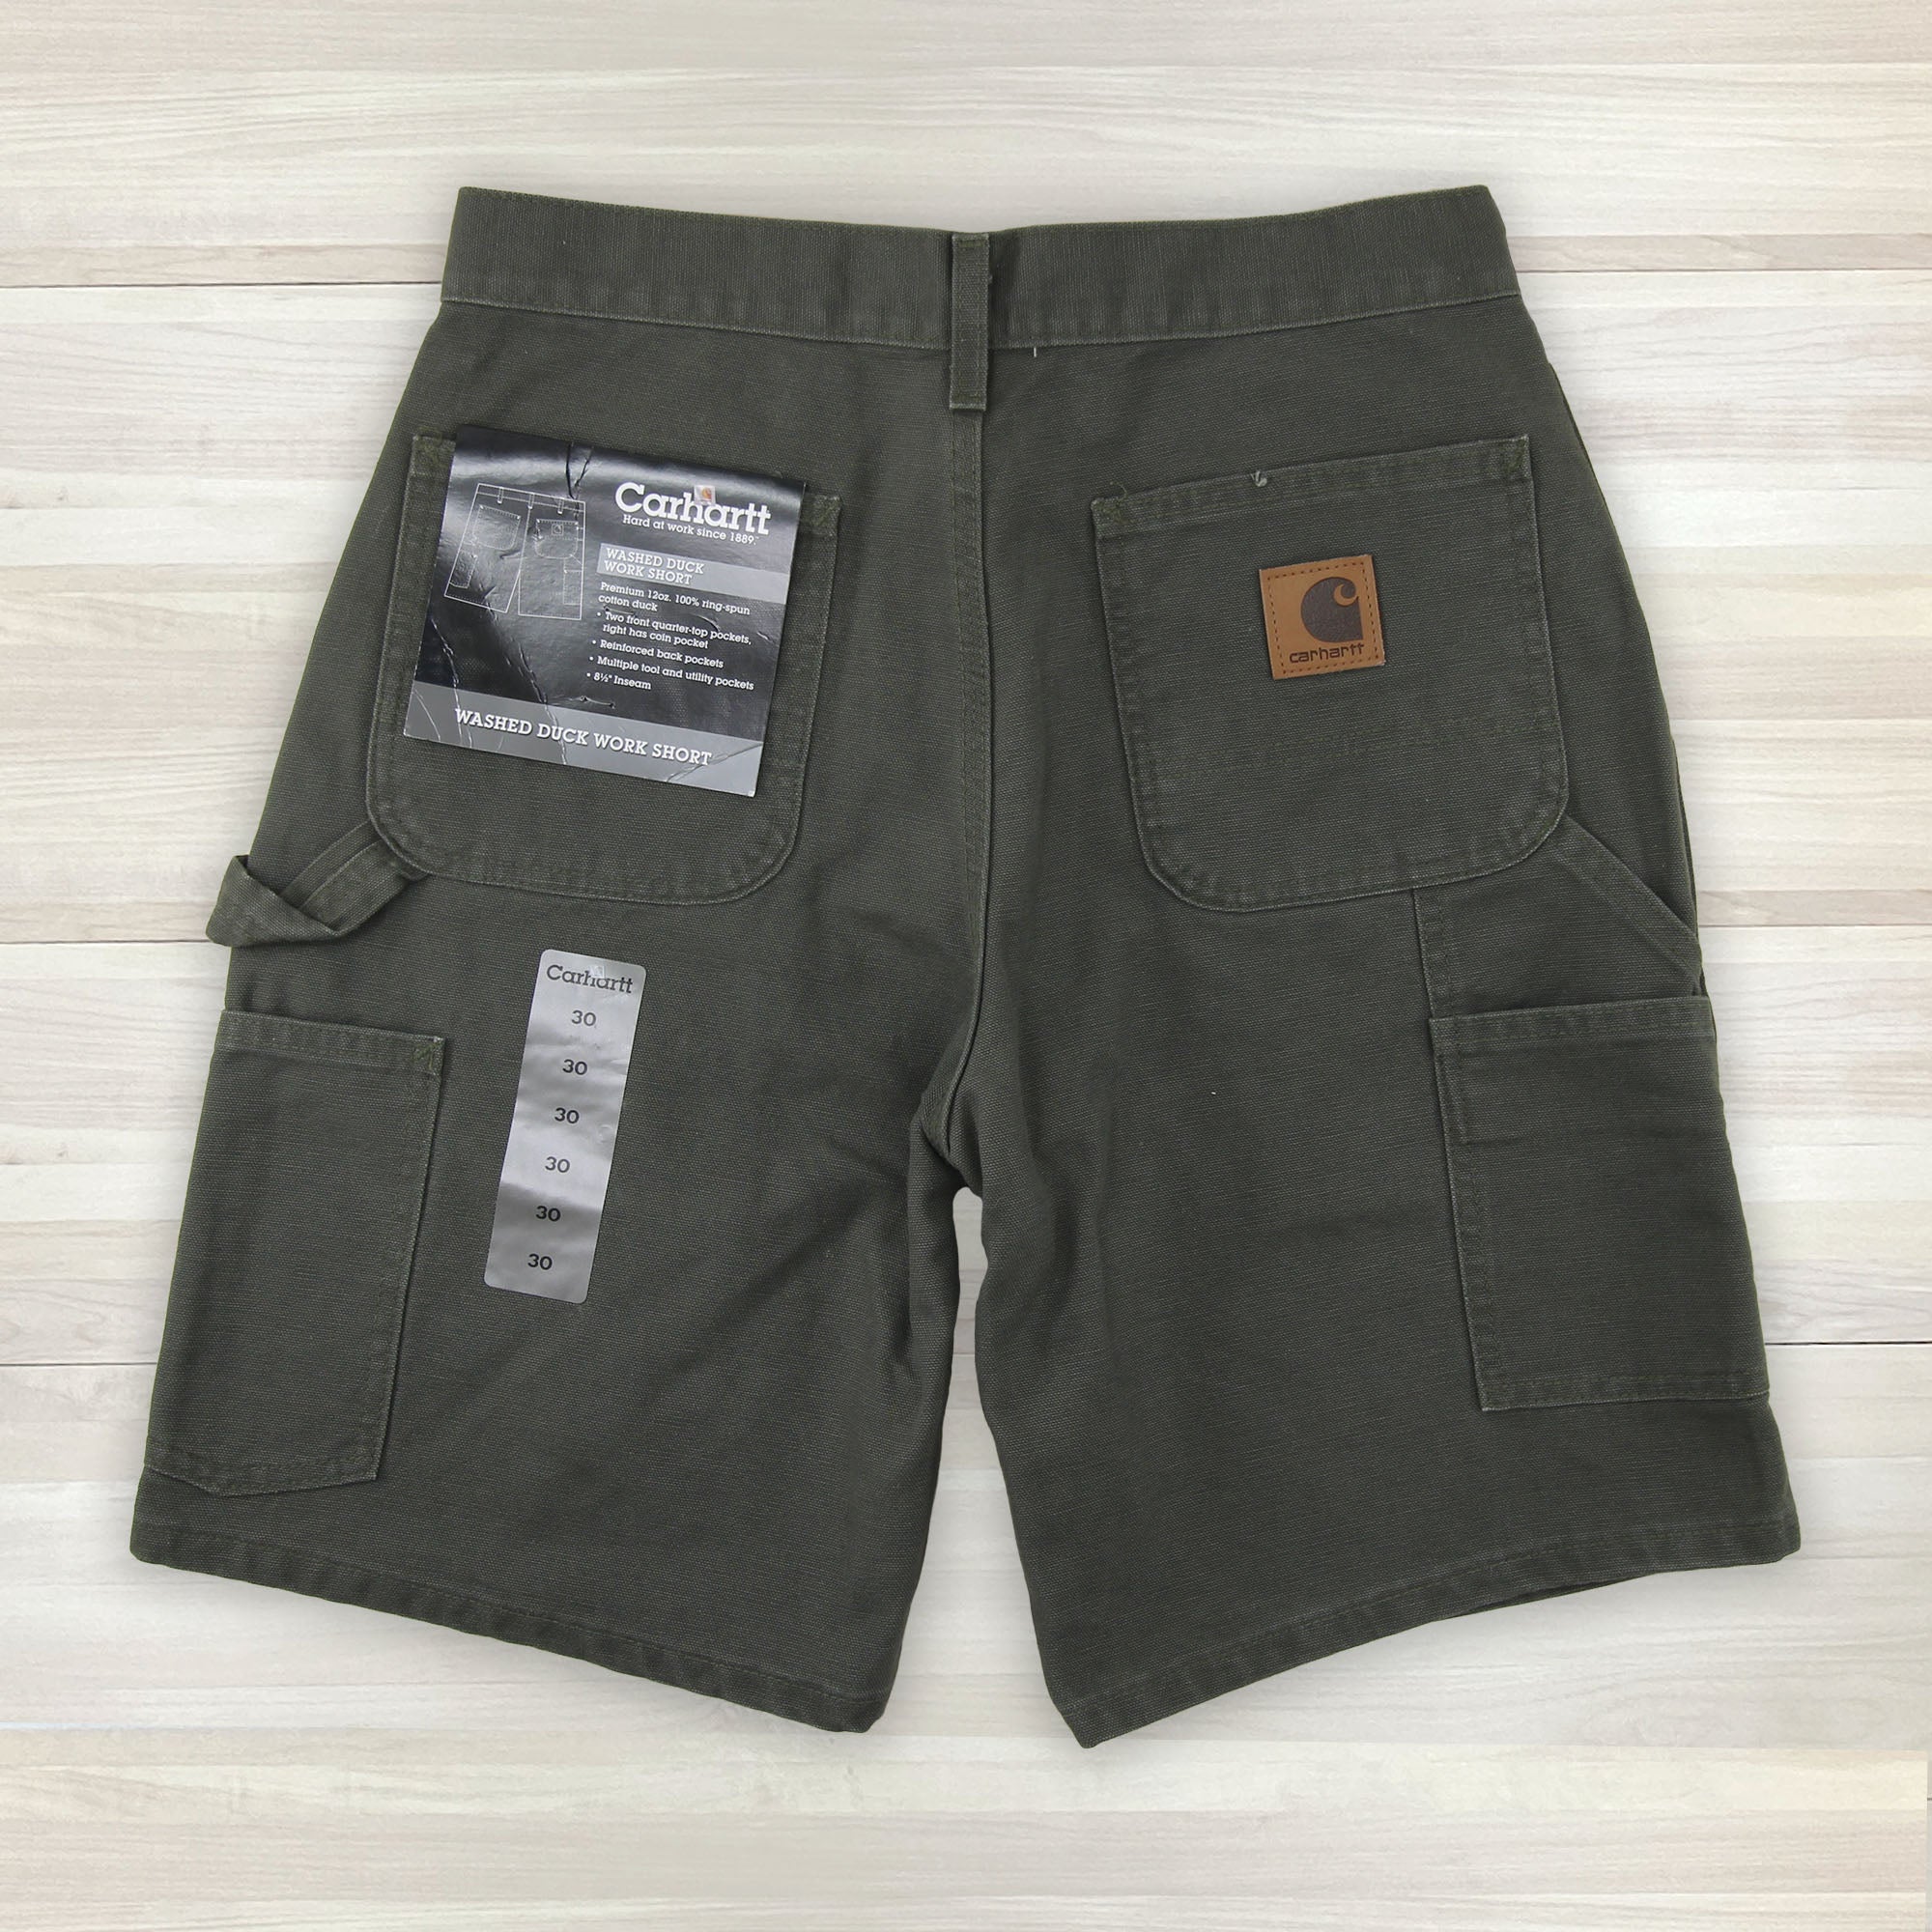 Men's Vintage Carhartt B25 Moss Washed Duck Shorts NWT 30x8.5 - 0